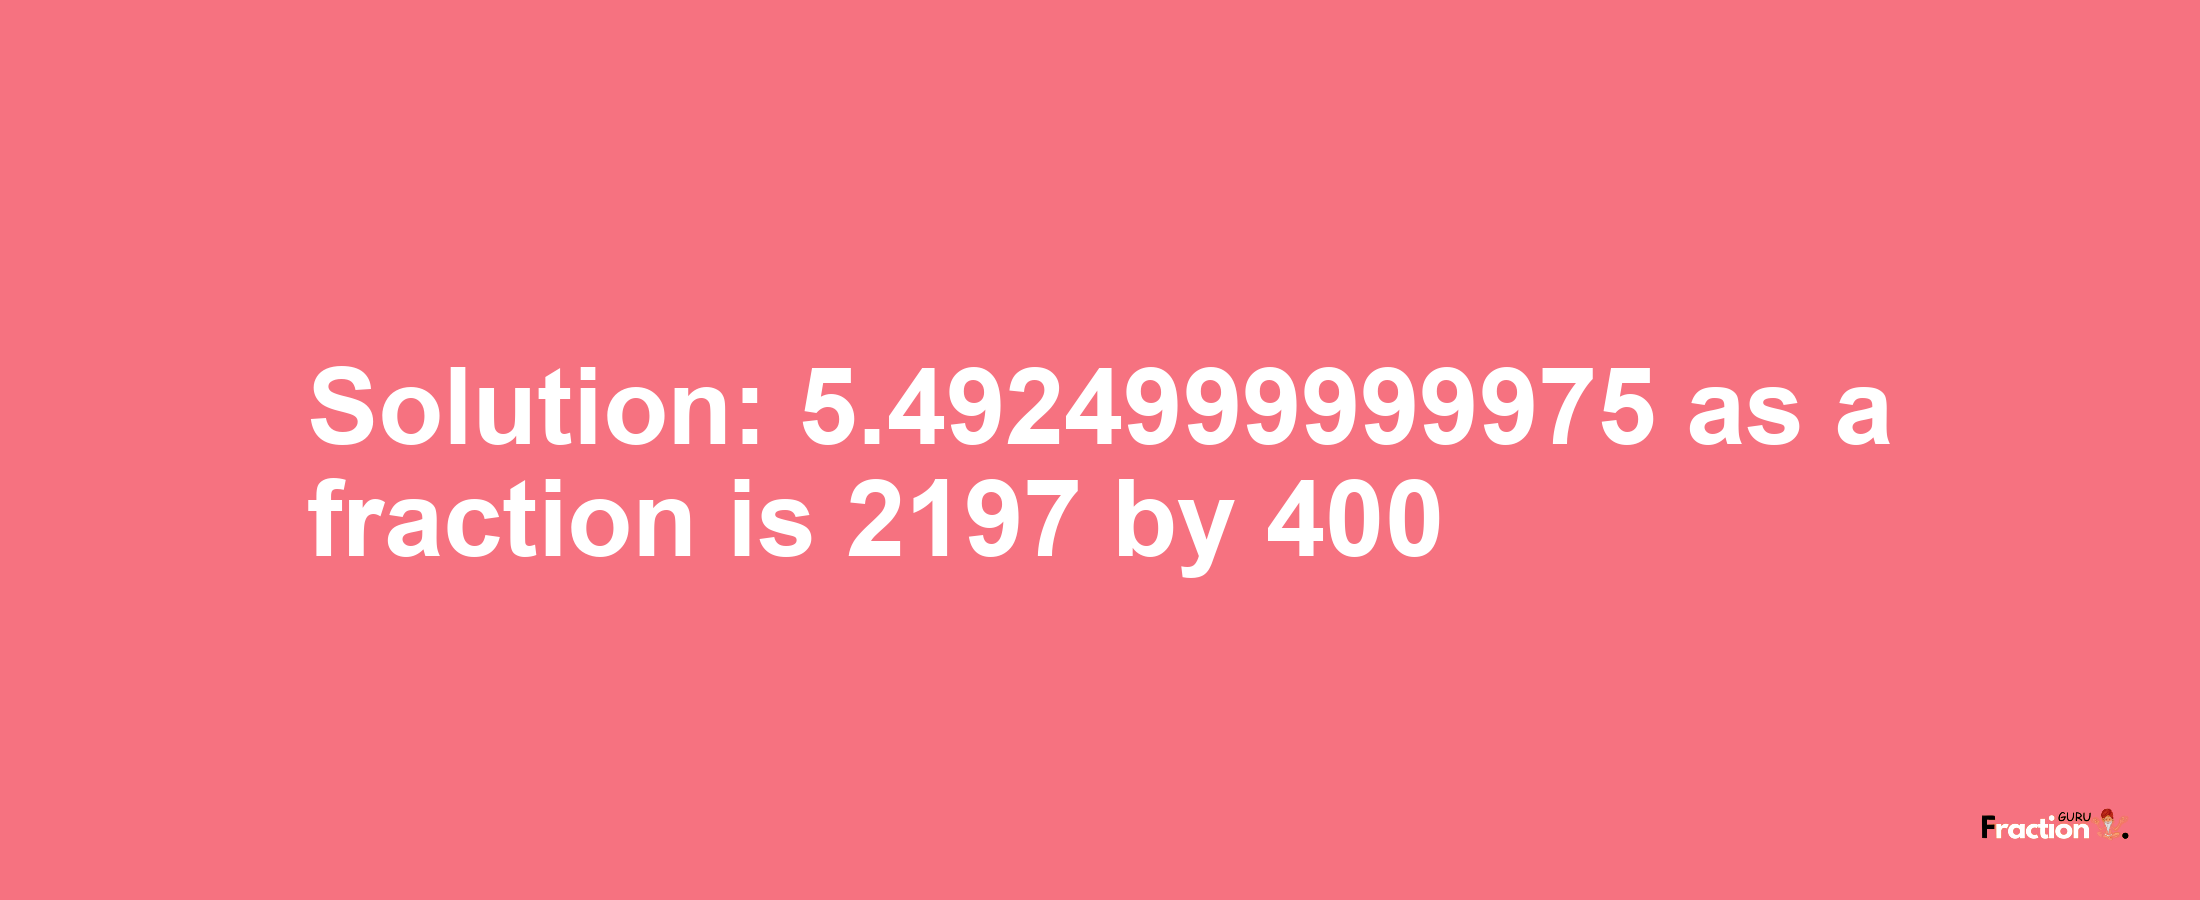 Solution:5.4924999999975 as a fraction is 2197/400